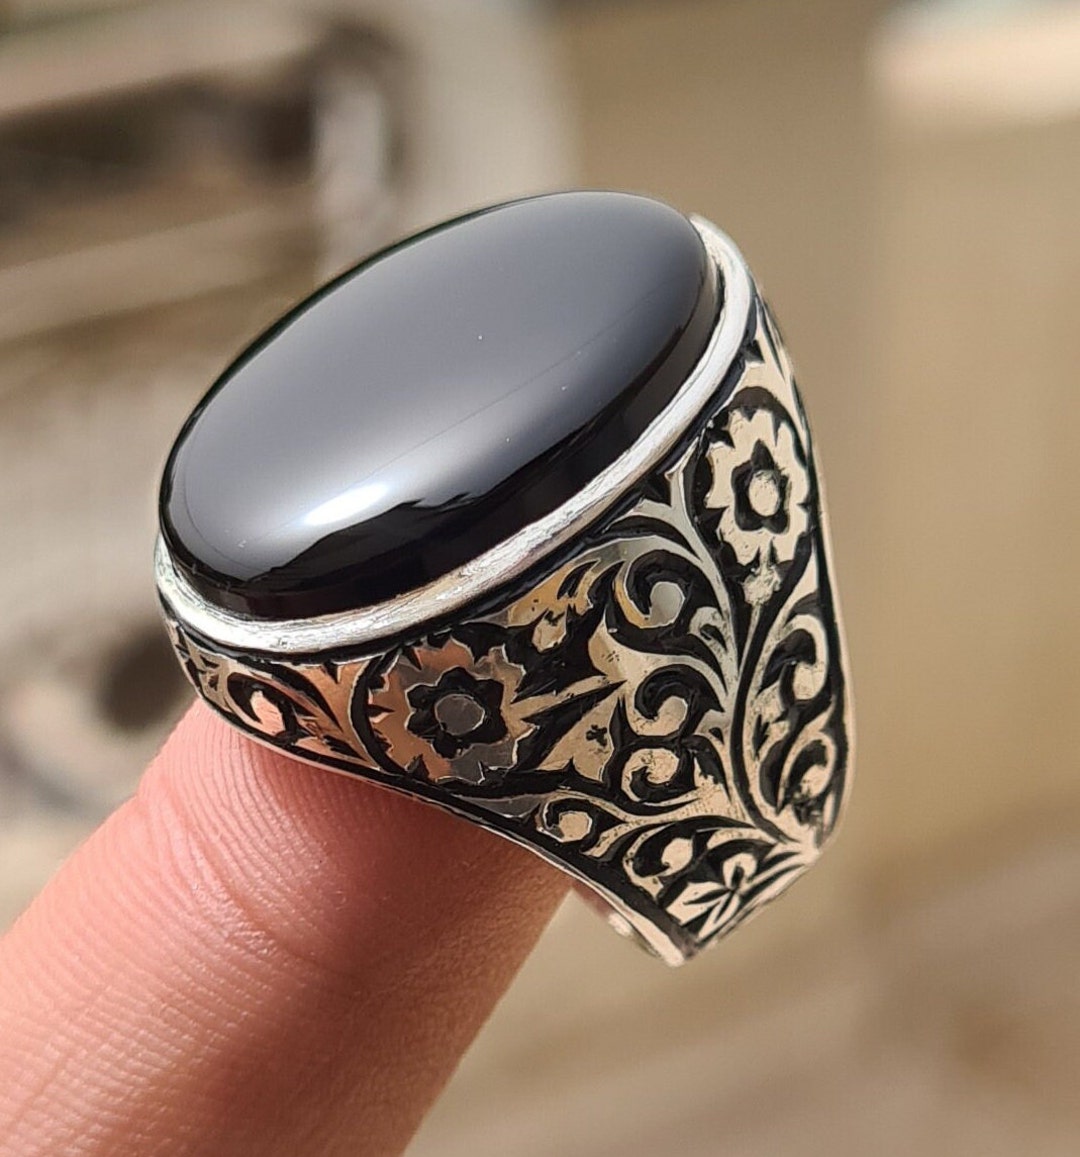 Agate Aqeeq 925 Silver Men's Ring. Man Jewellery Stamped With Silver Stamp  925 All Sizes Are